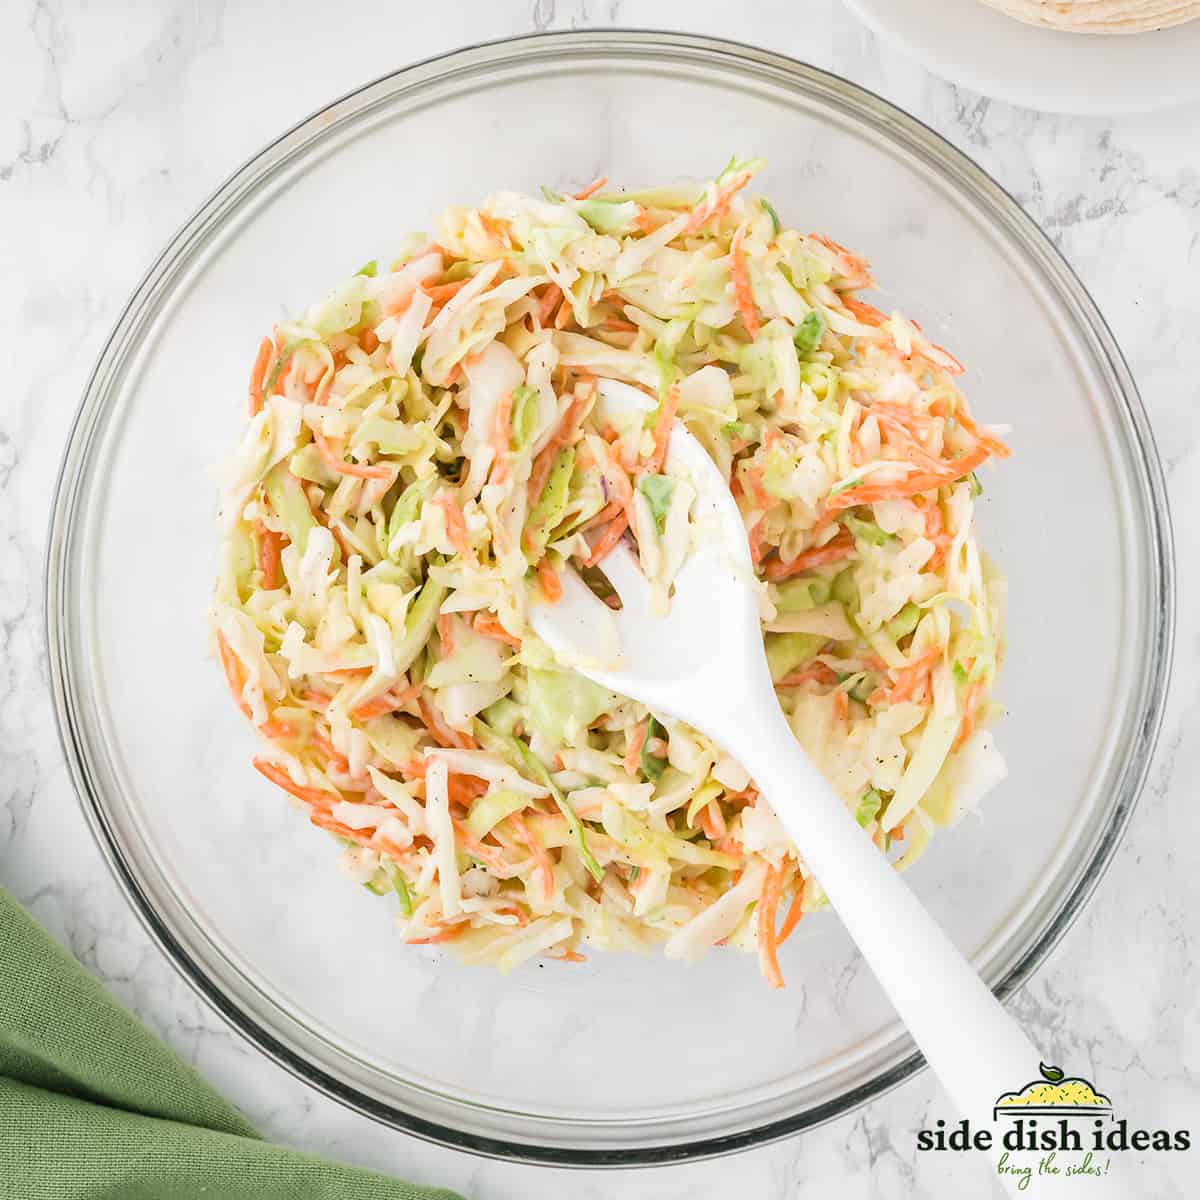 coleslaw mixed in a bowl